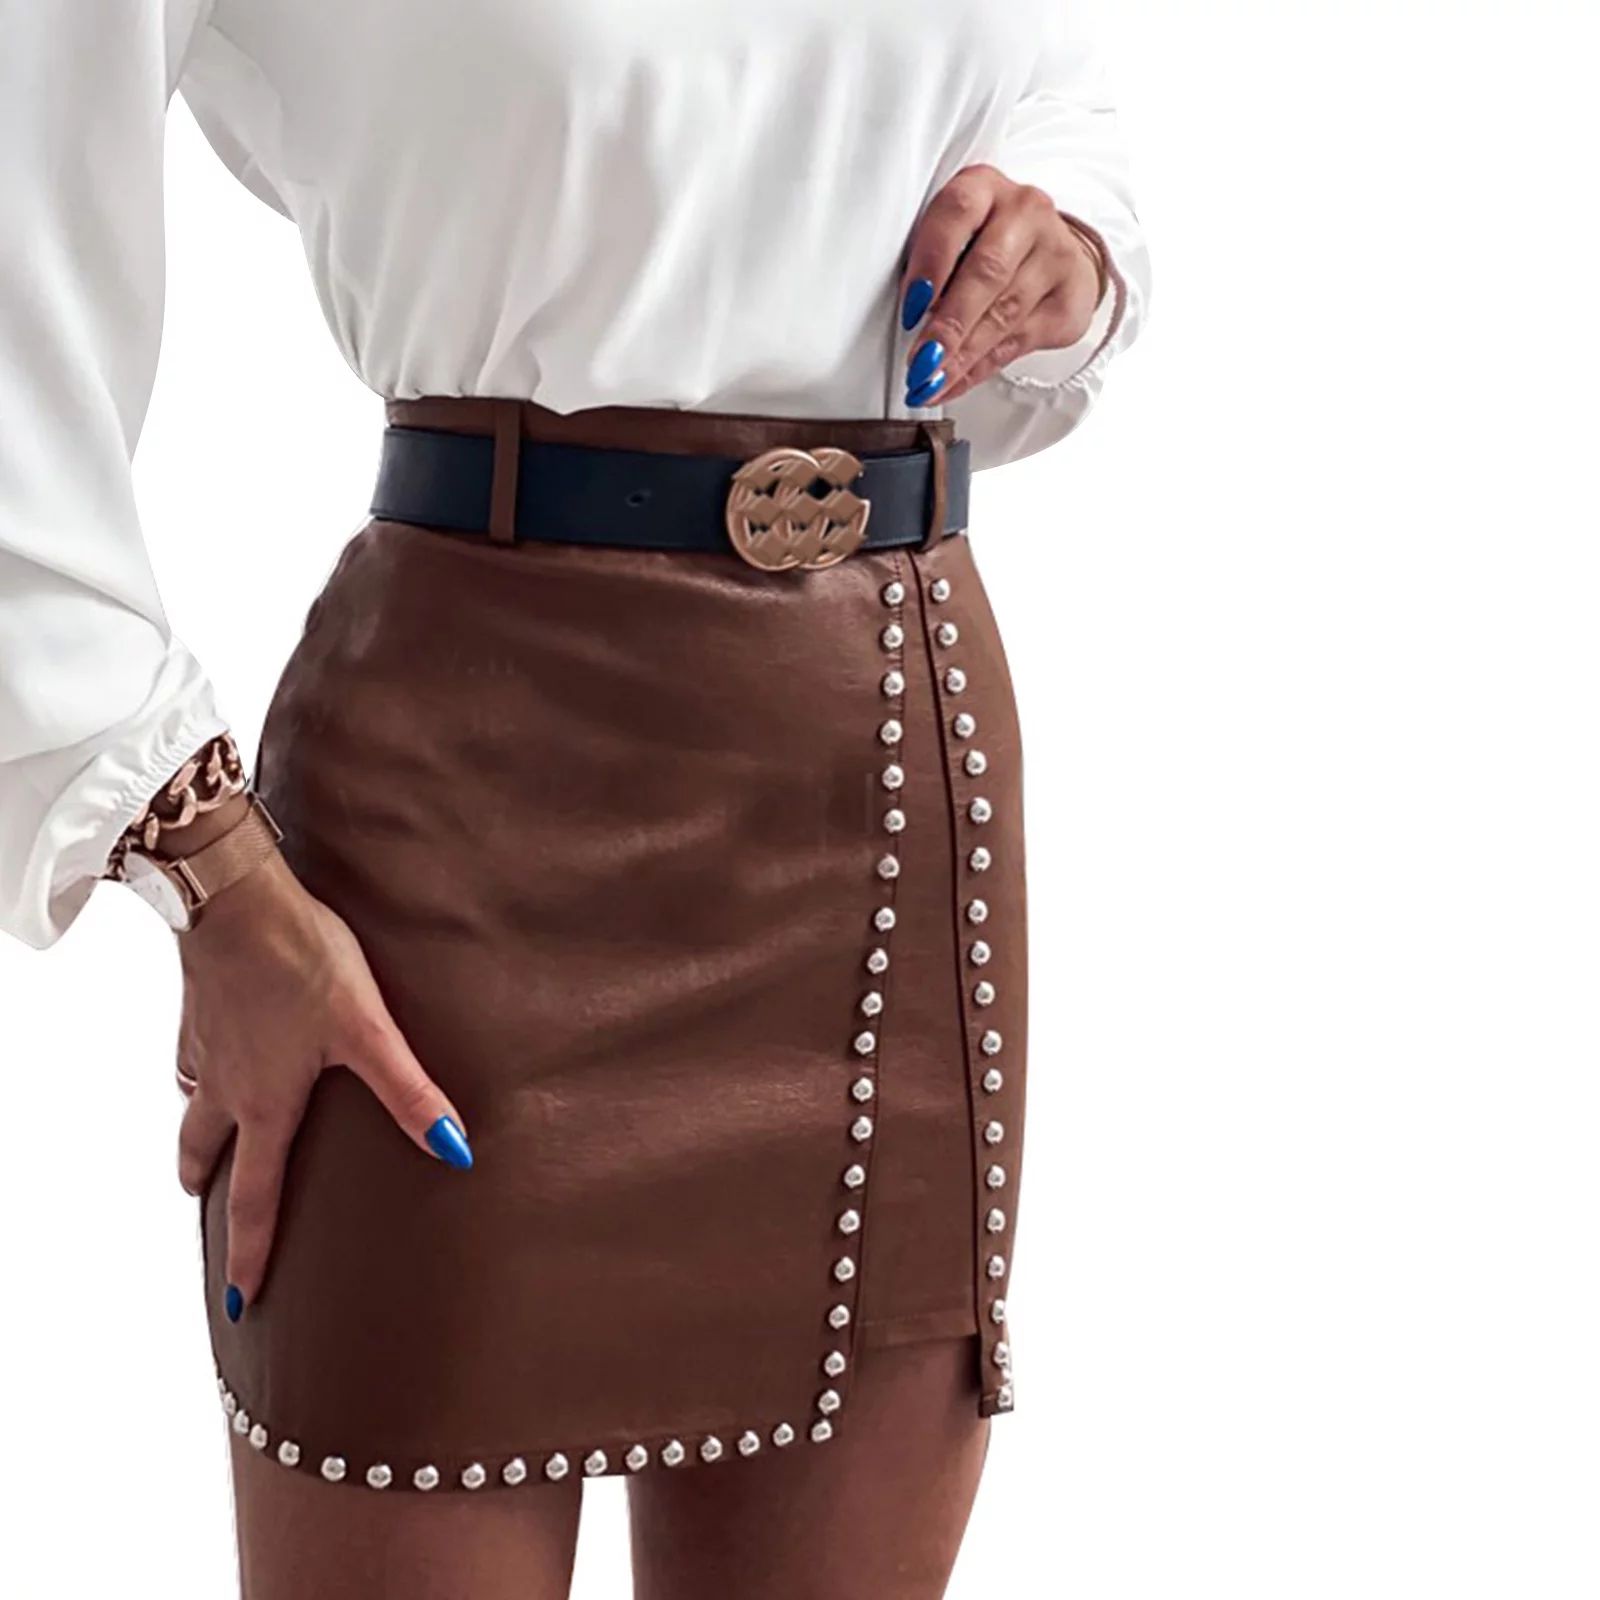 One opening Women Sexy Skirt, Adults Leather Skirt with Decorative Rhinestones | Walmart (US)